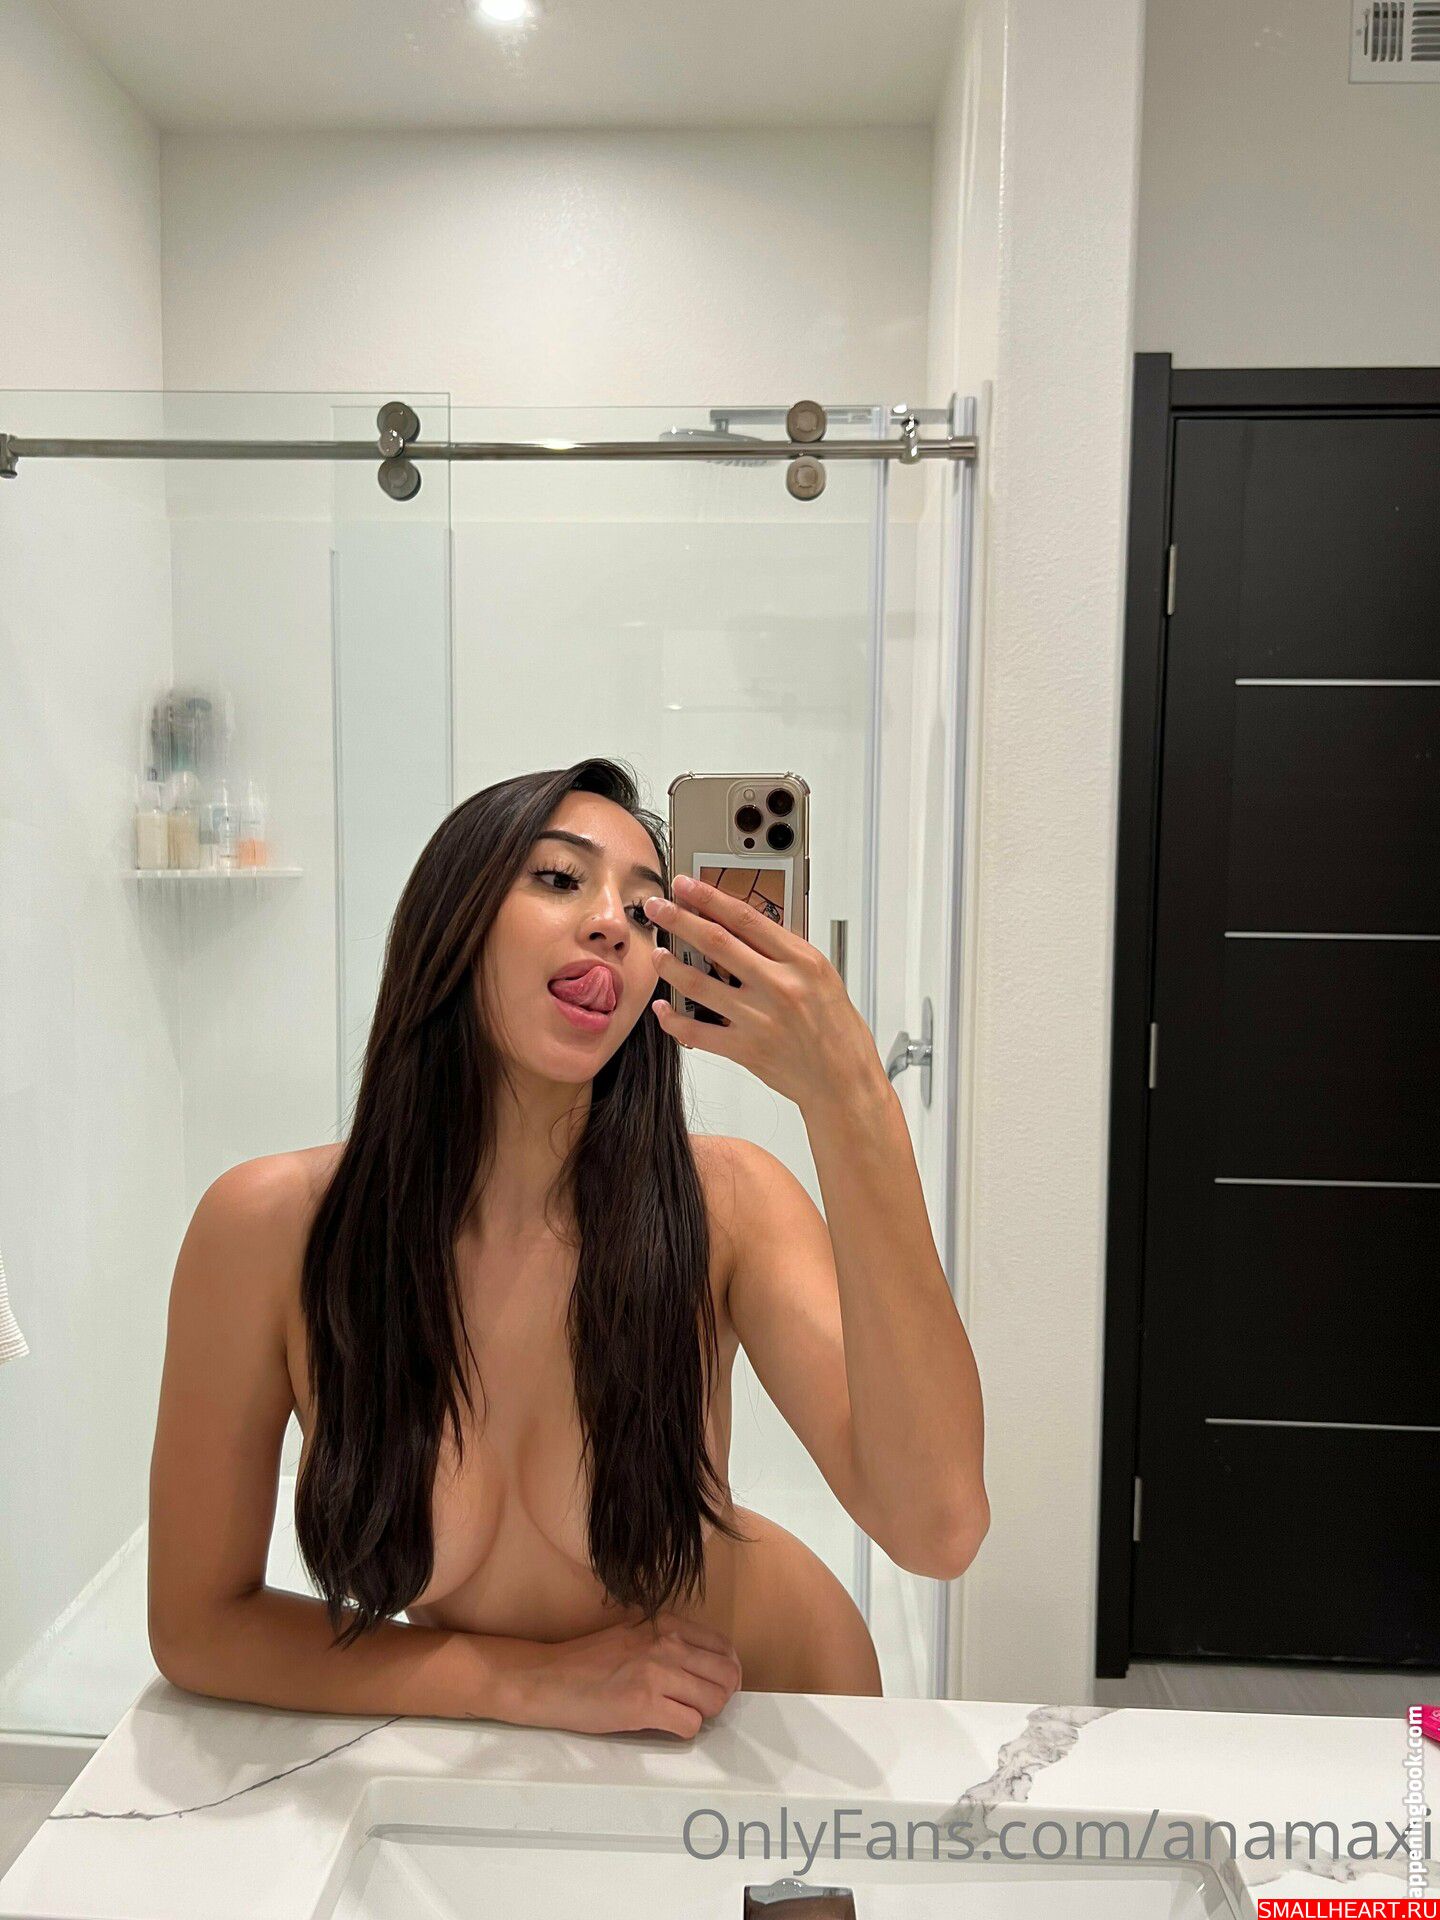 Ana Maxi  anamaxi Nude, OnlyFans Leaks, The Fappening - Photo #6855316 - F...